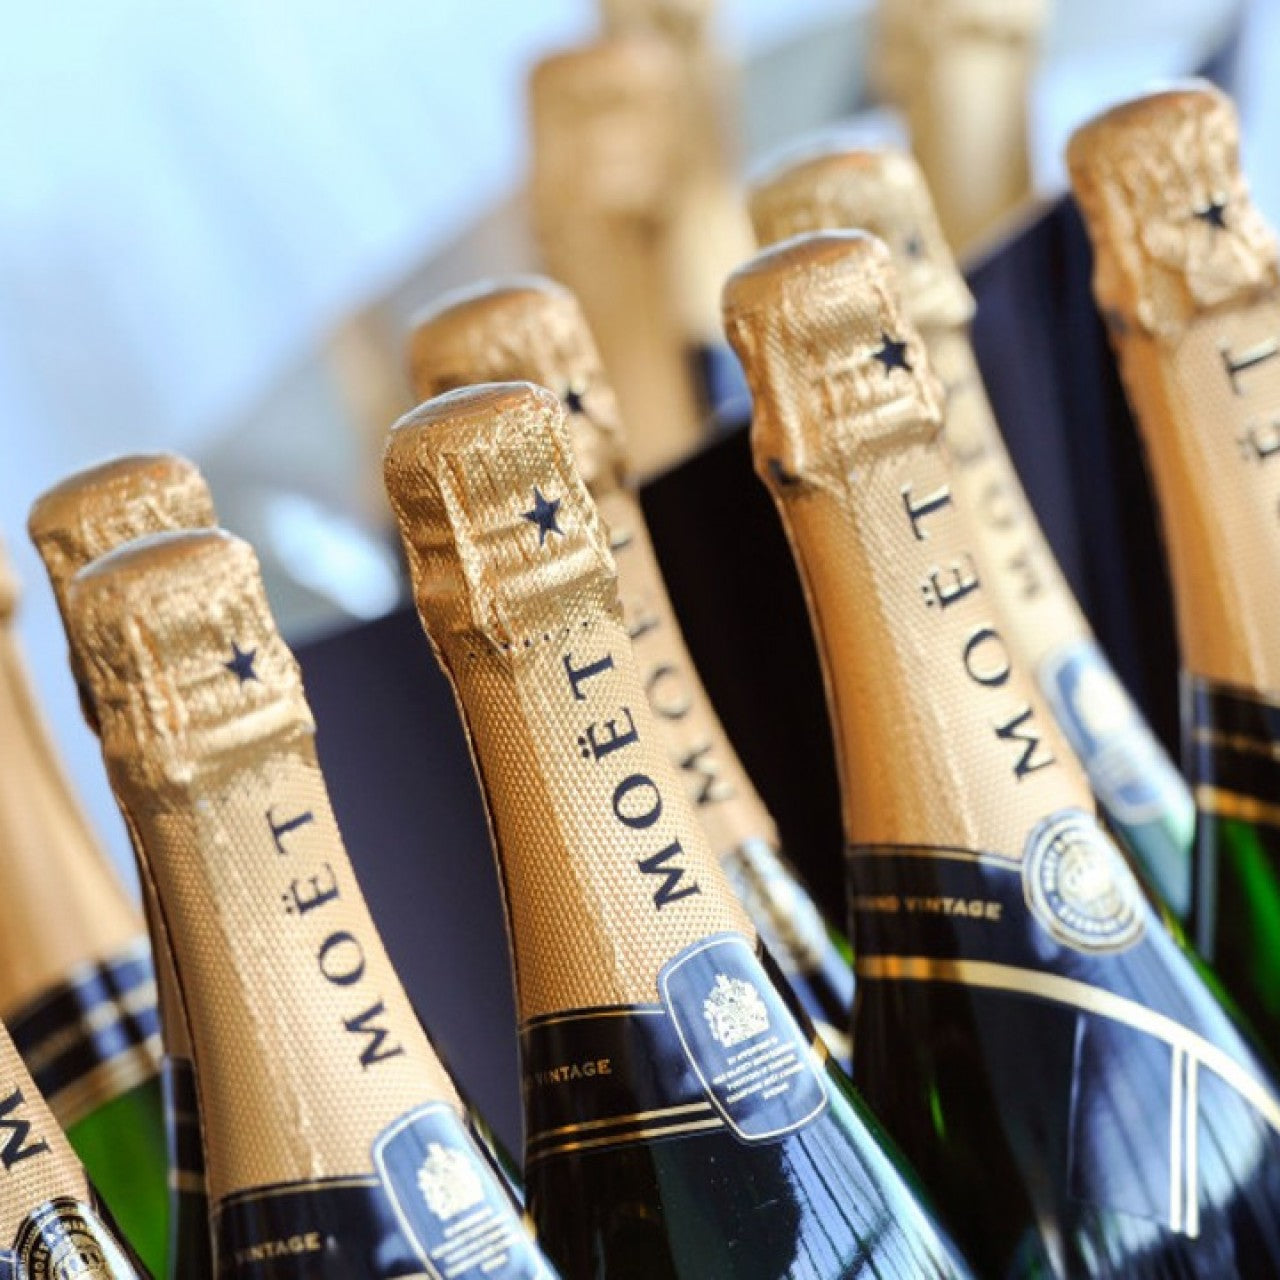 Moet & Chandon Nectar Imperial Brut Price & Reviews